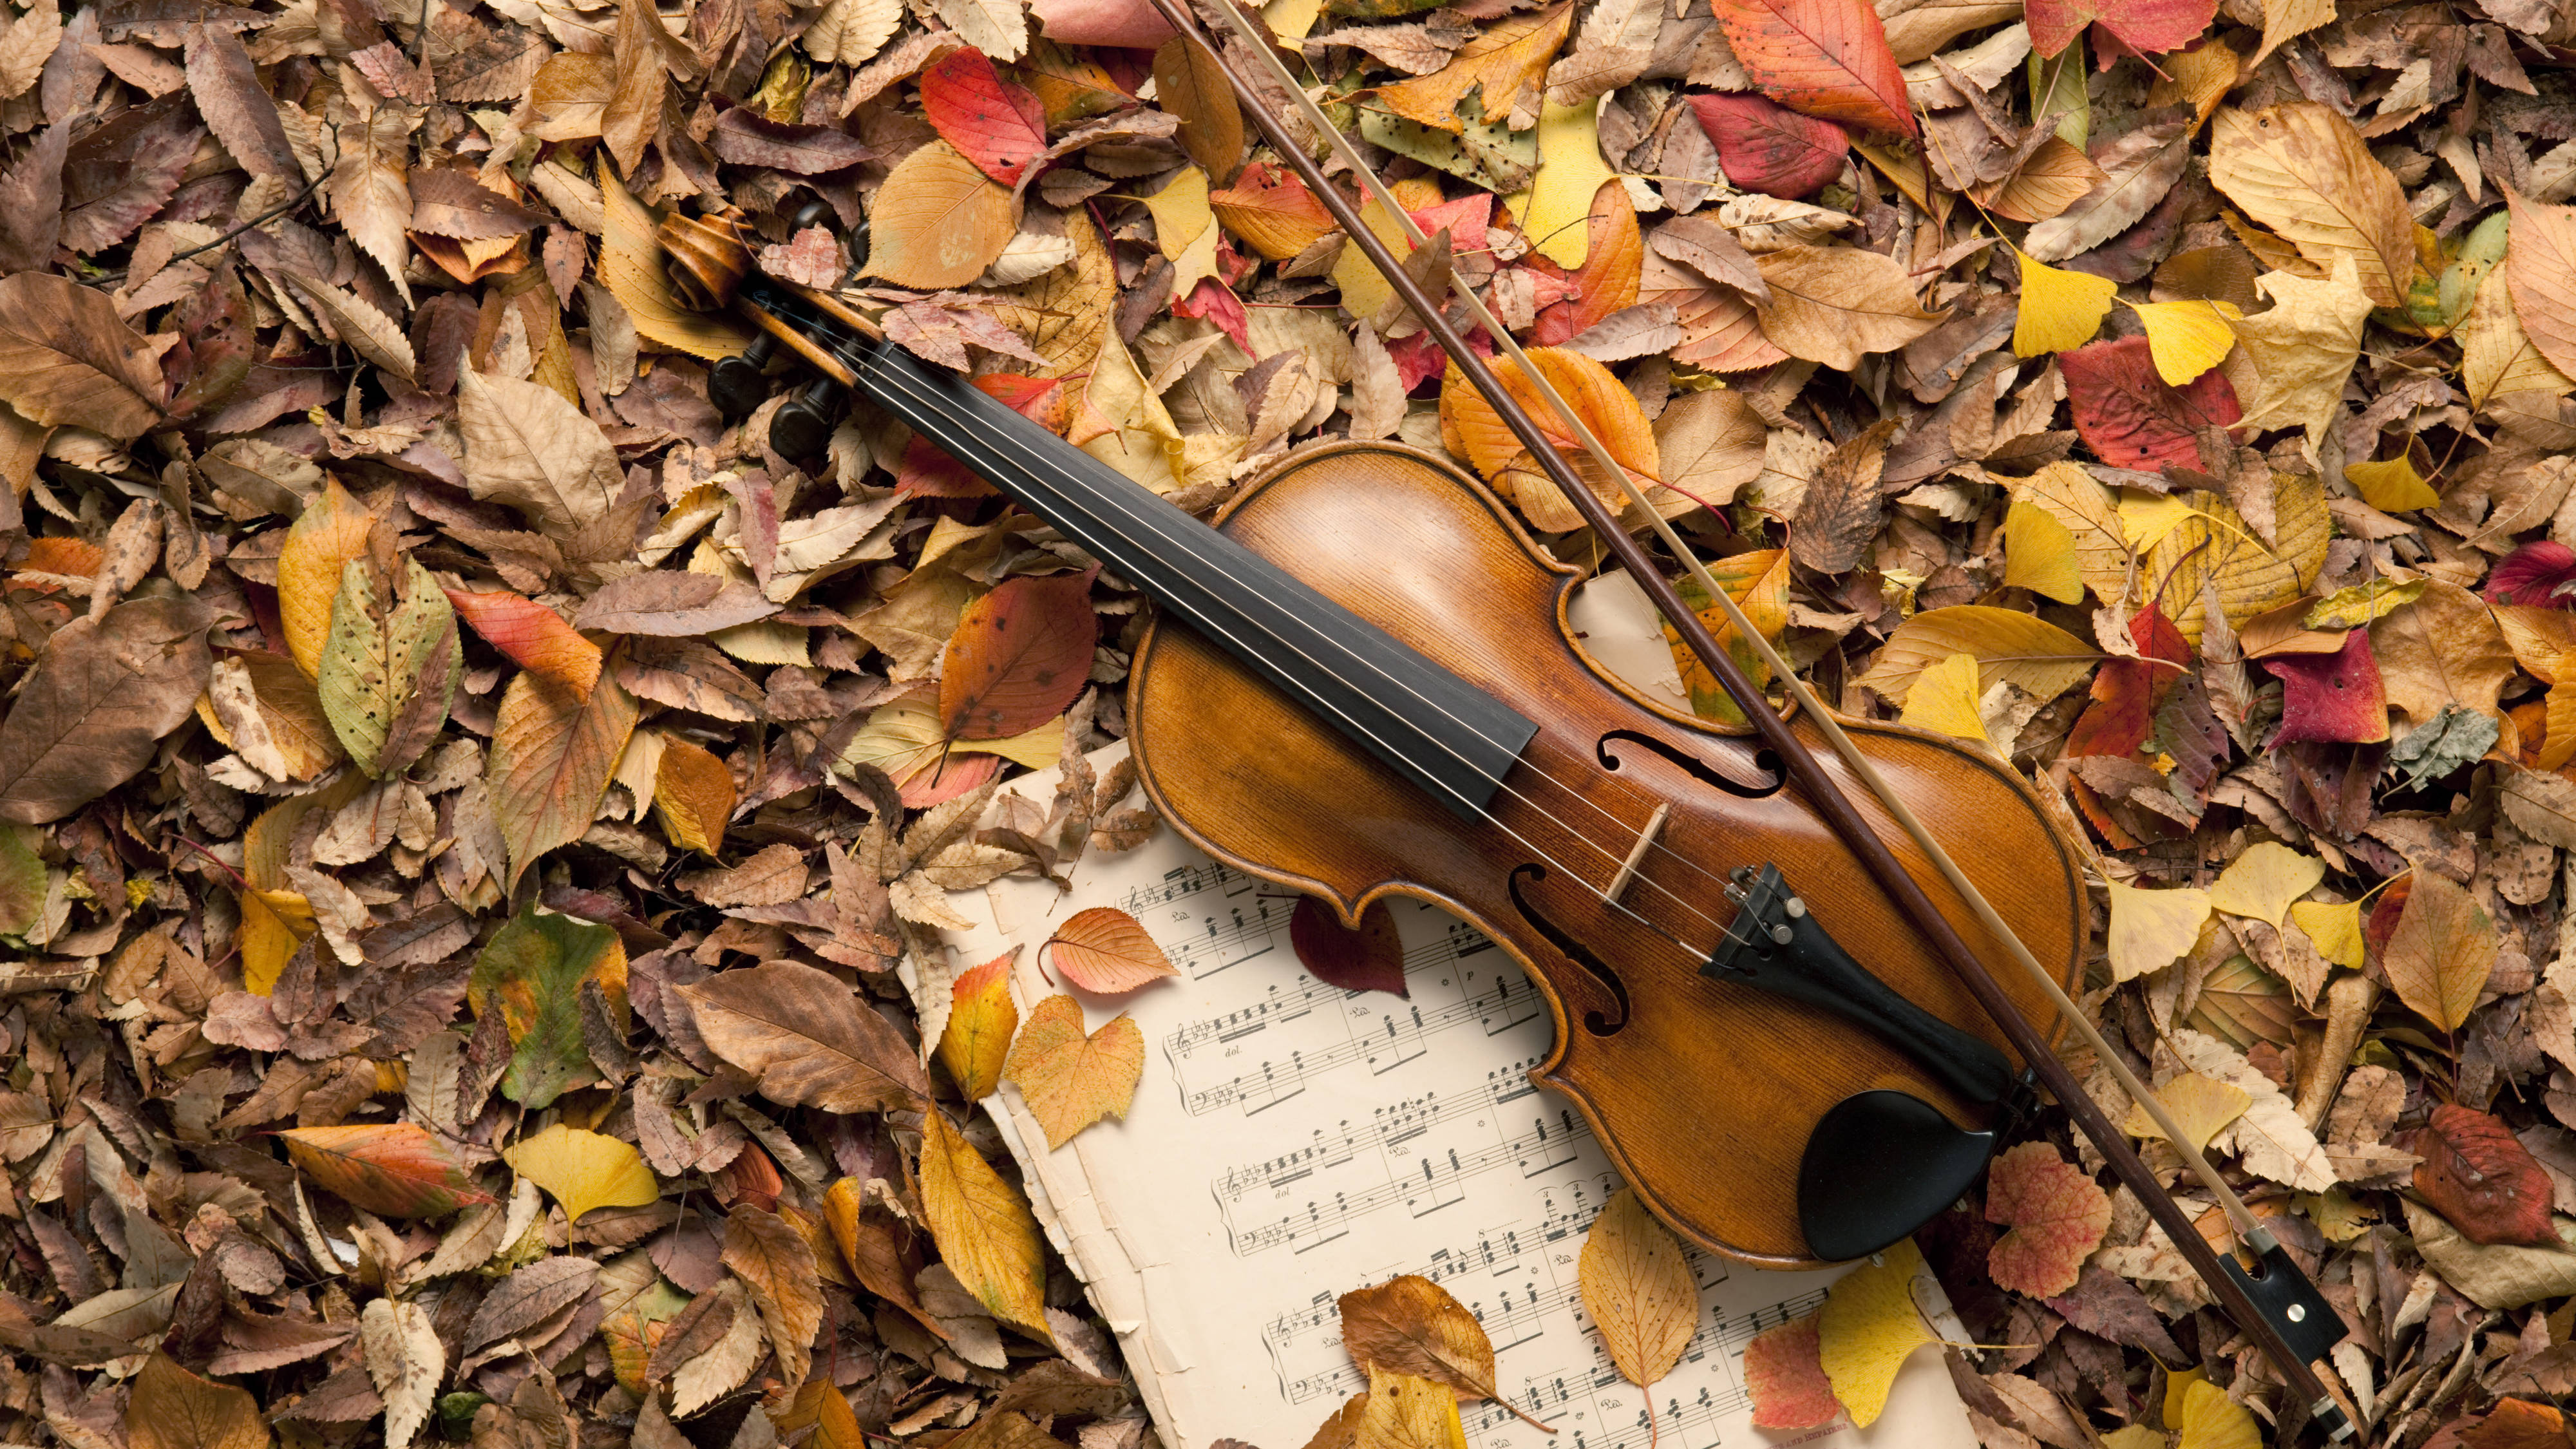 11 evocative pieces of classical music inspired by autumn - Classic FM